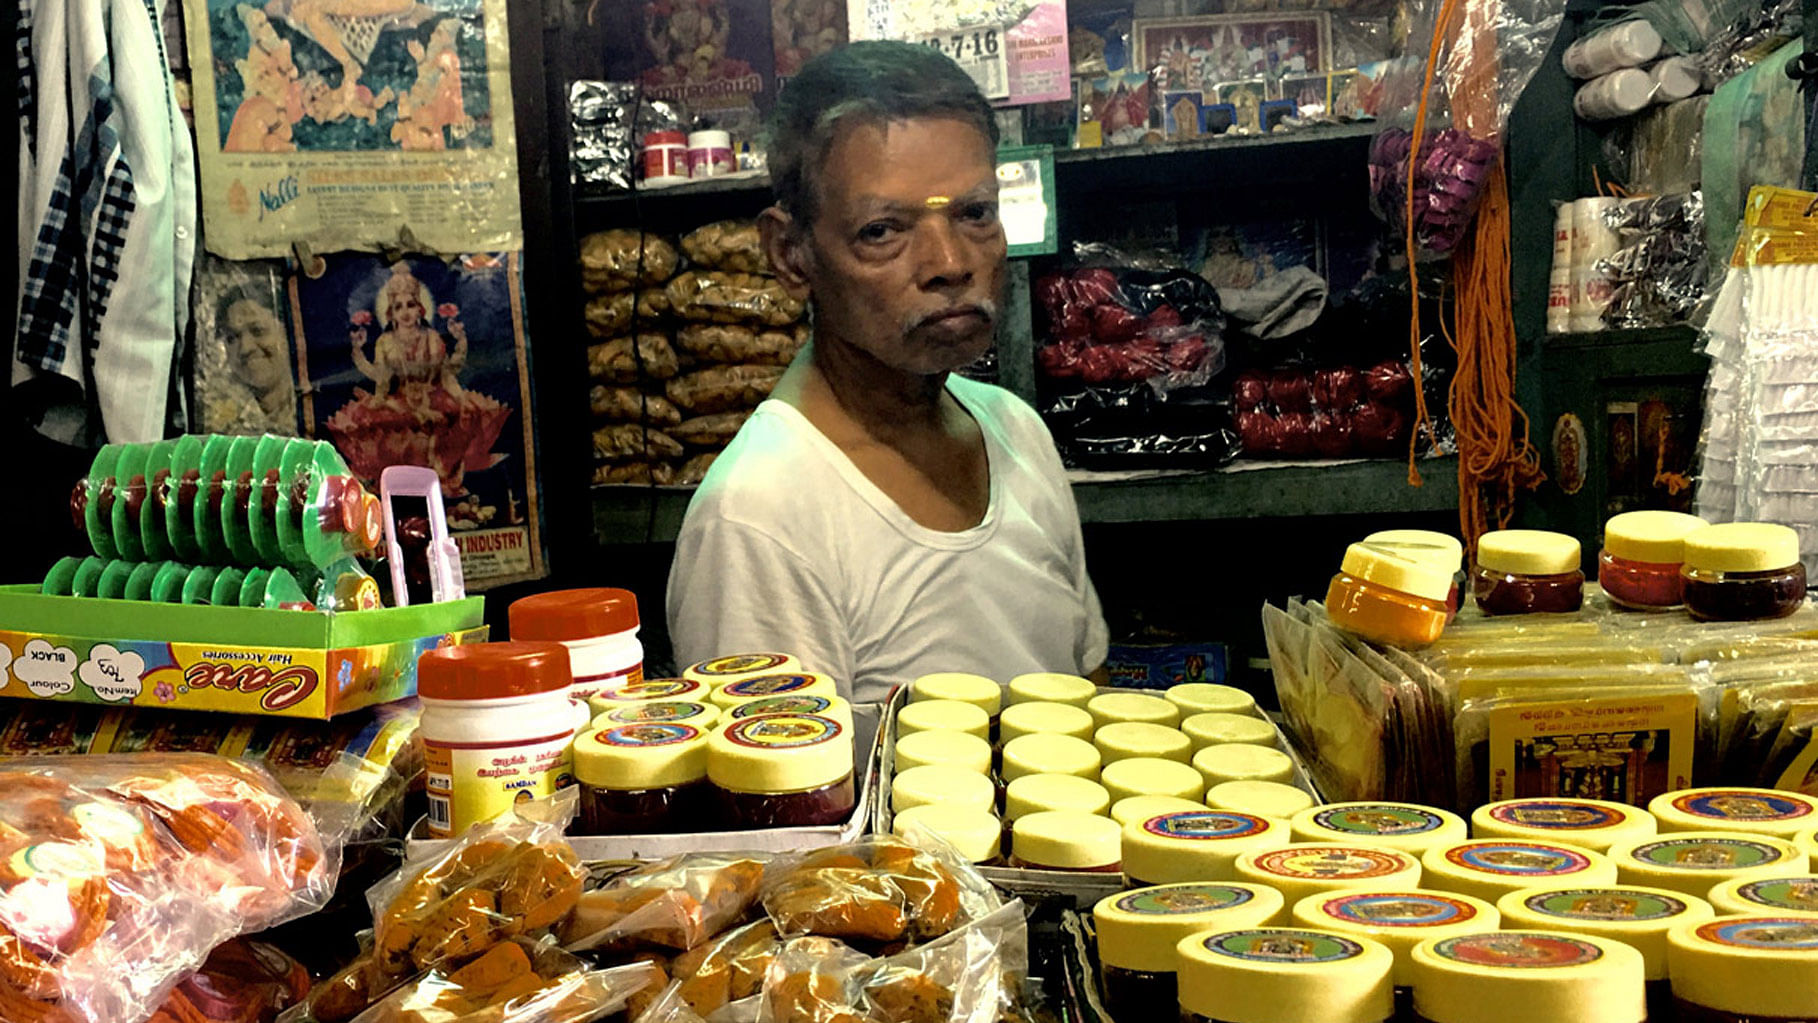 Small business owners have to grasp the new concepts under GST. (Photo: Vikram Venkateswaran/<b>The Quint</b>)